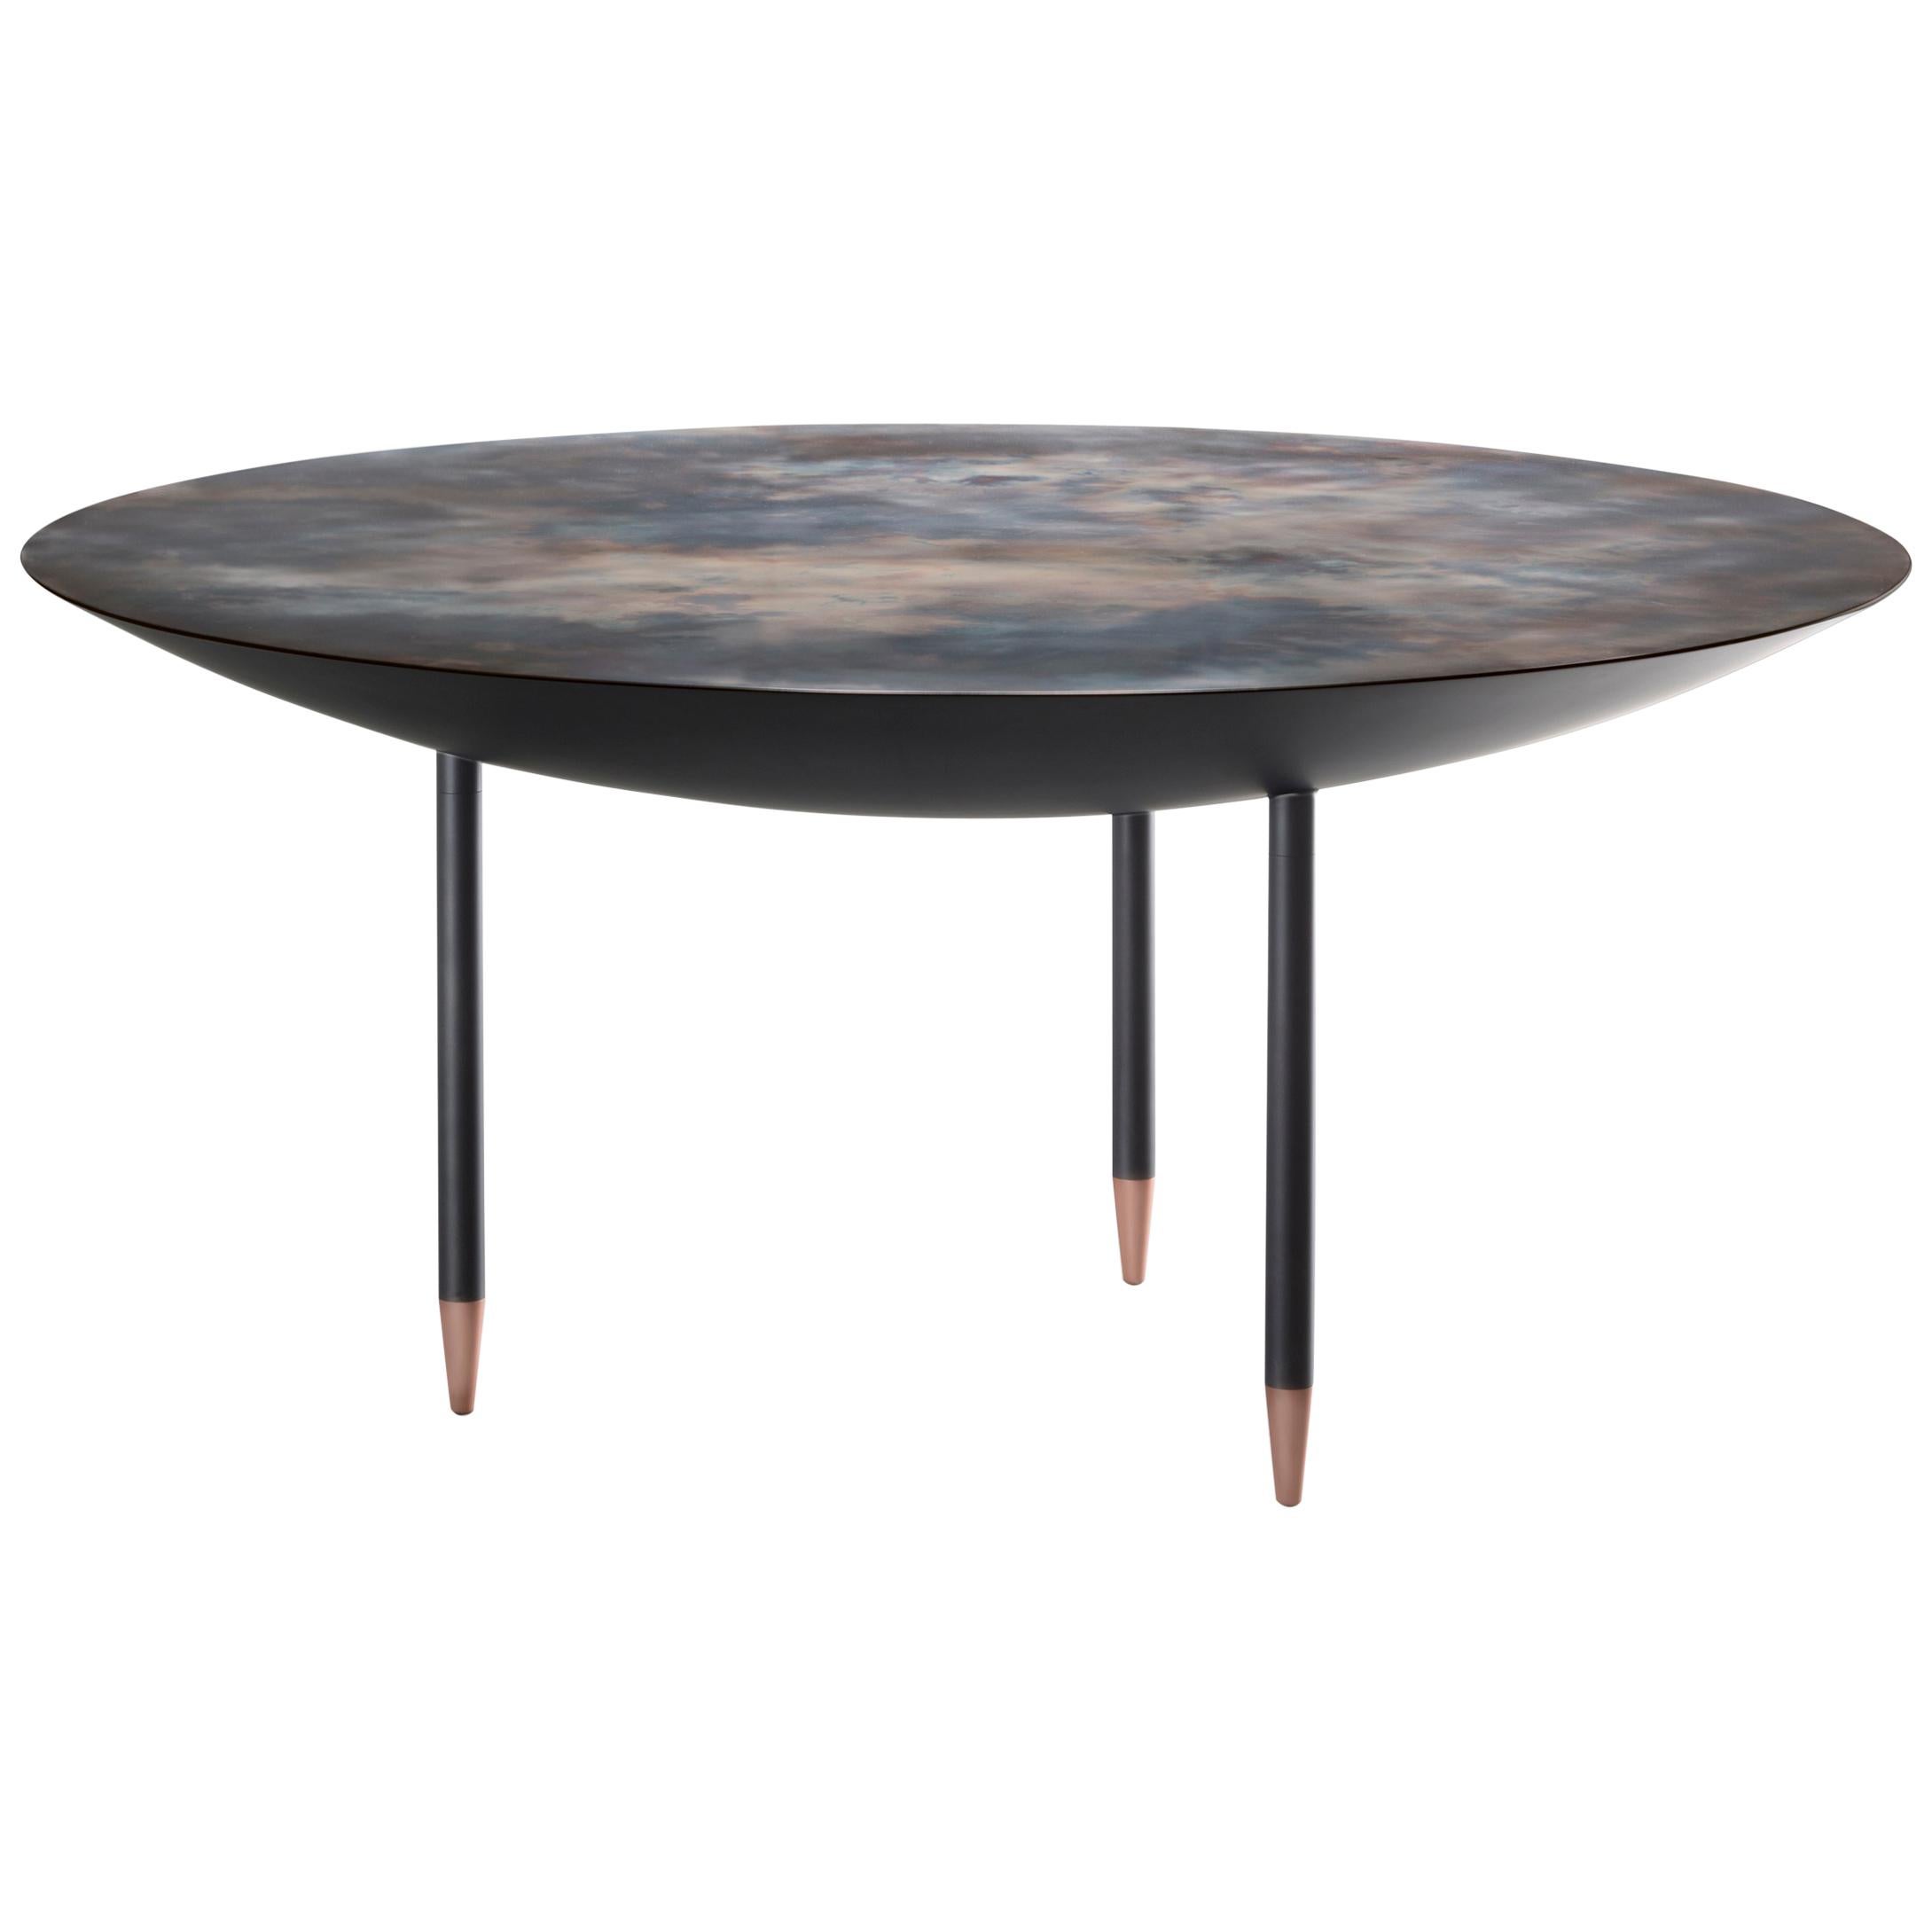 DeCastelli Roma 160 Table in Stainless Steel Top with Copper Feet For Sale